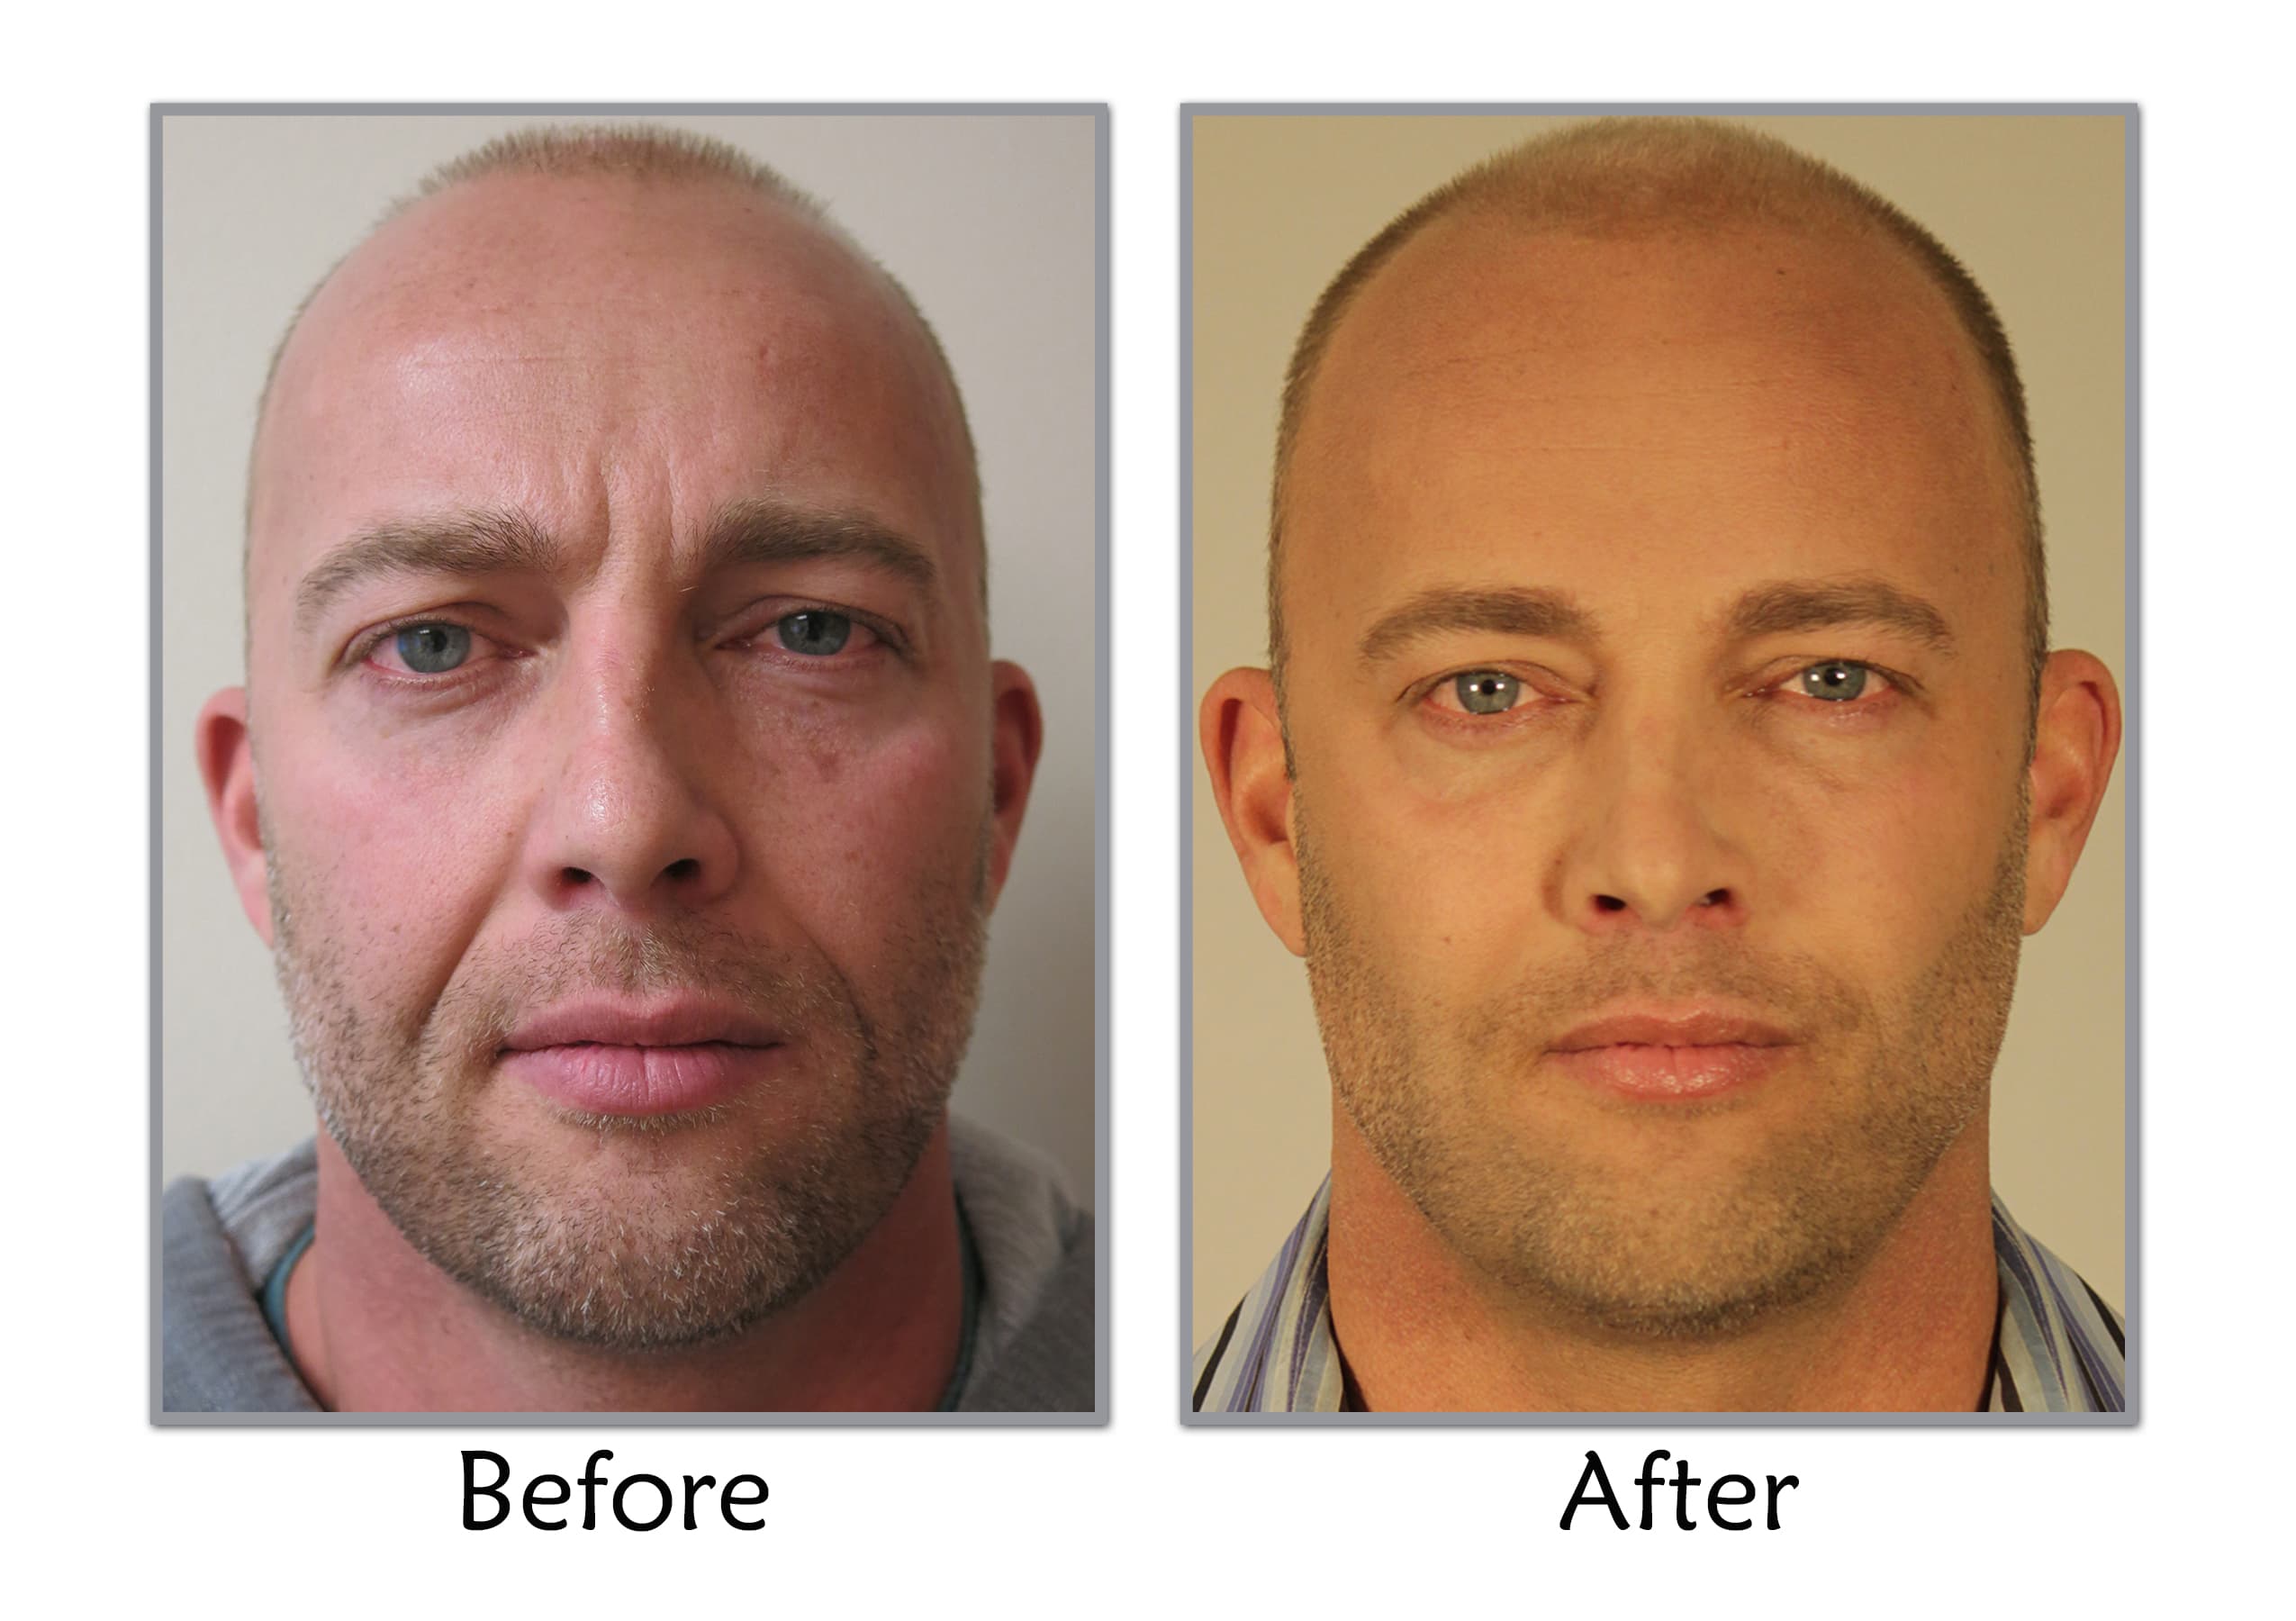 The Facial Plastic Surgery For Men In Turkey Before And After Pictures 1